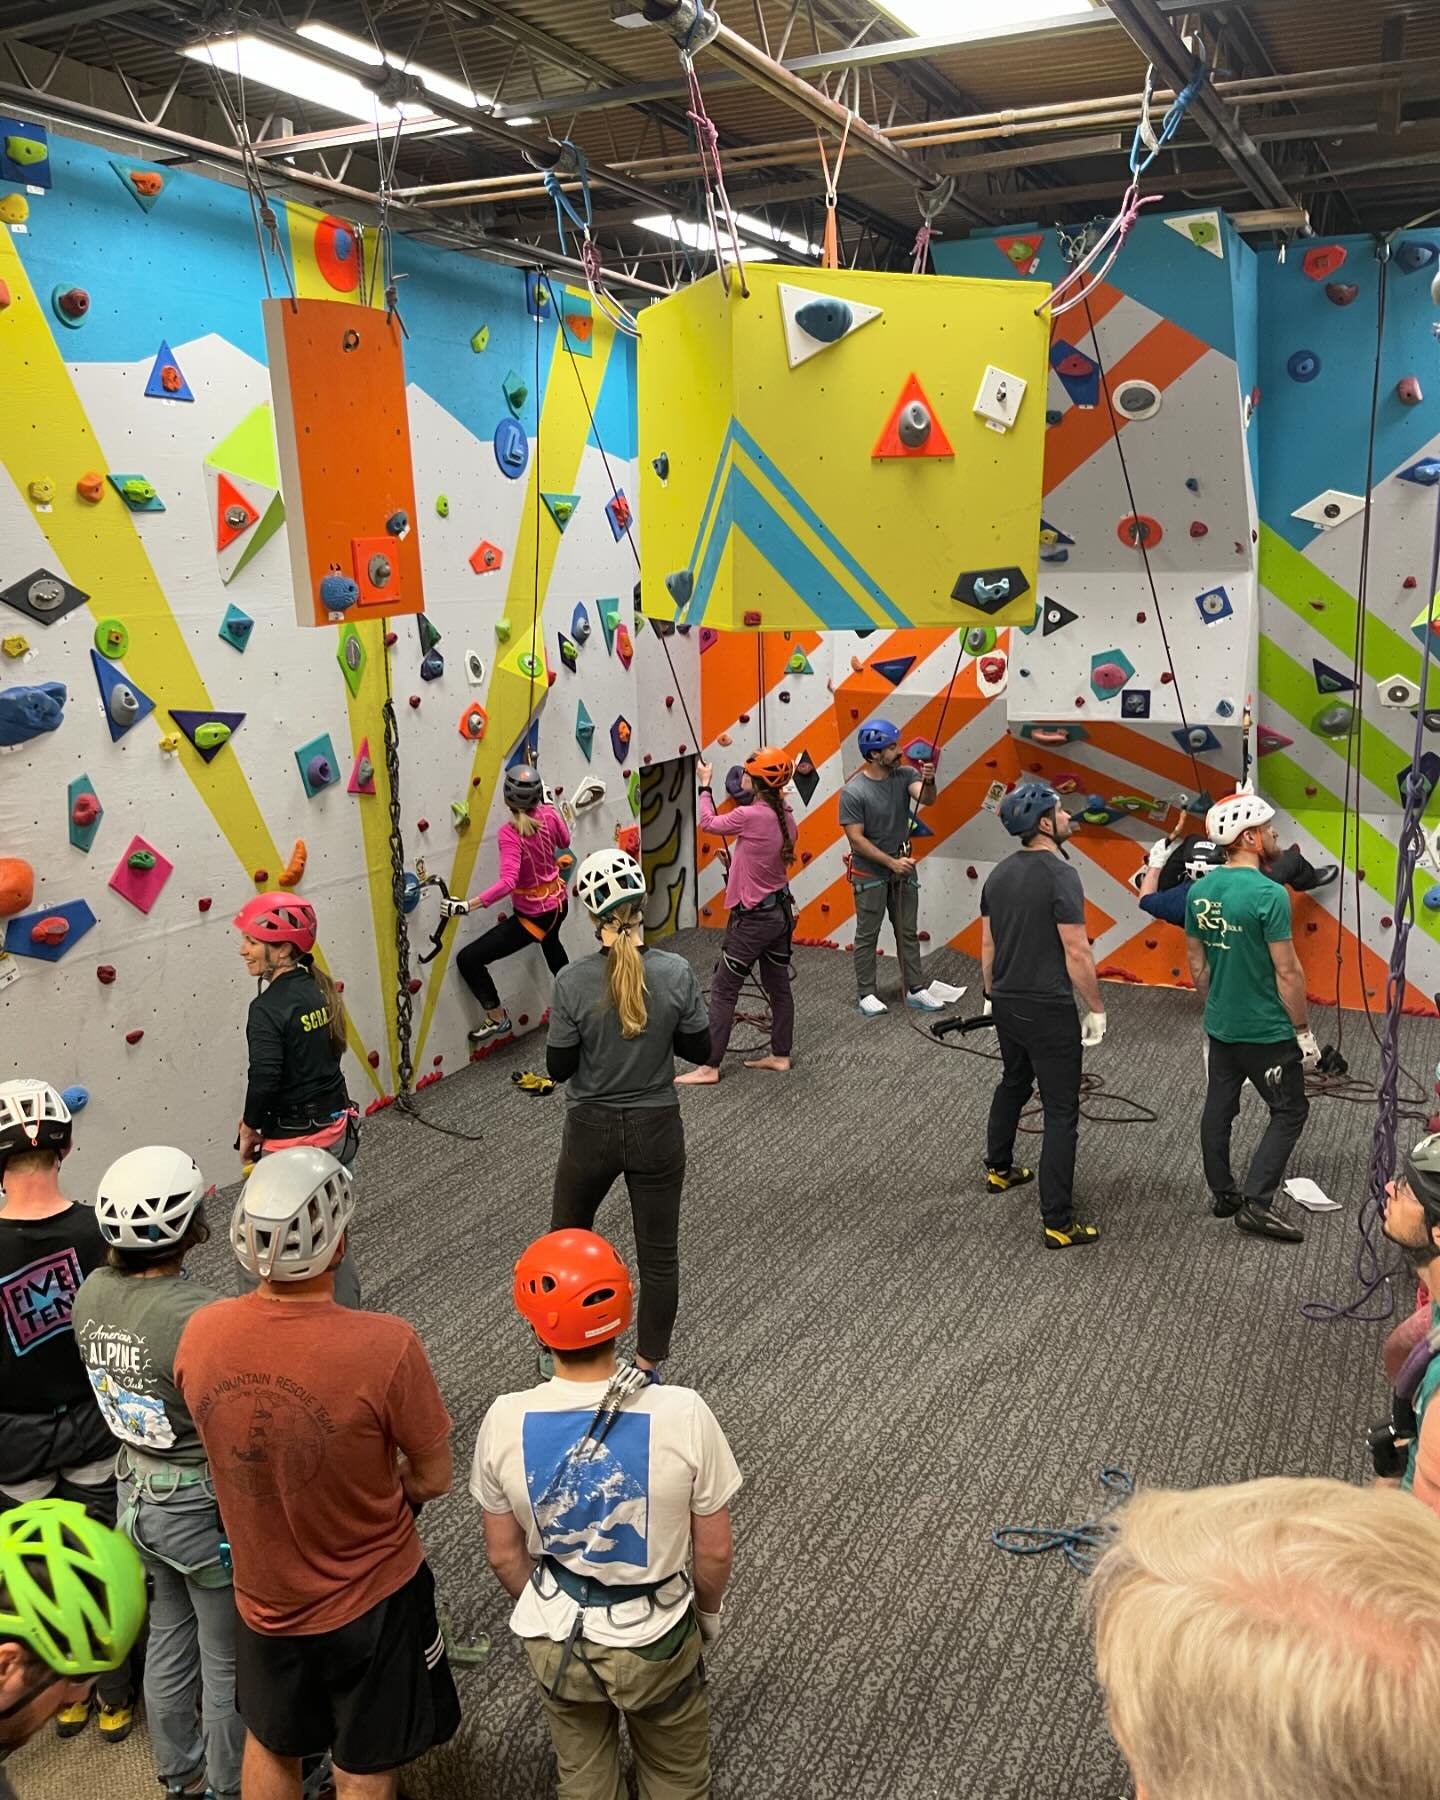 The Grand Re-Opening was a huge success! We made the most of our new little space and had some amazing people join us and celebrate the return of Utah&rsquo;s only drytooling gym. 

We held an open house from 10-12 and saw many new faces excited to s